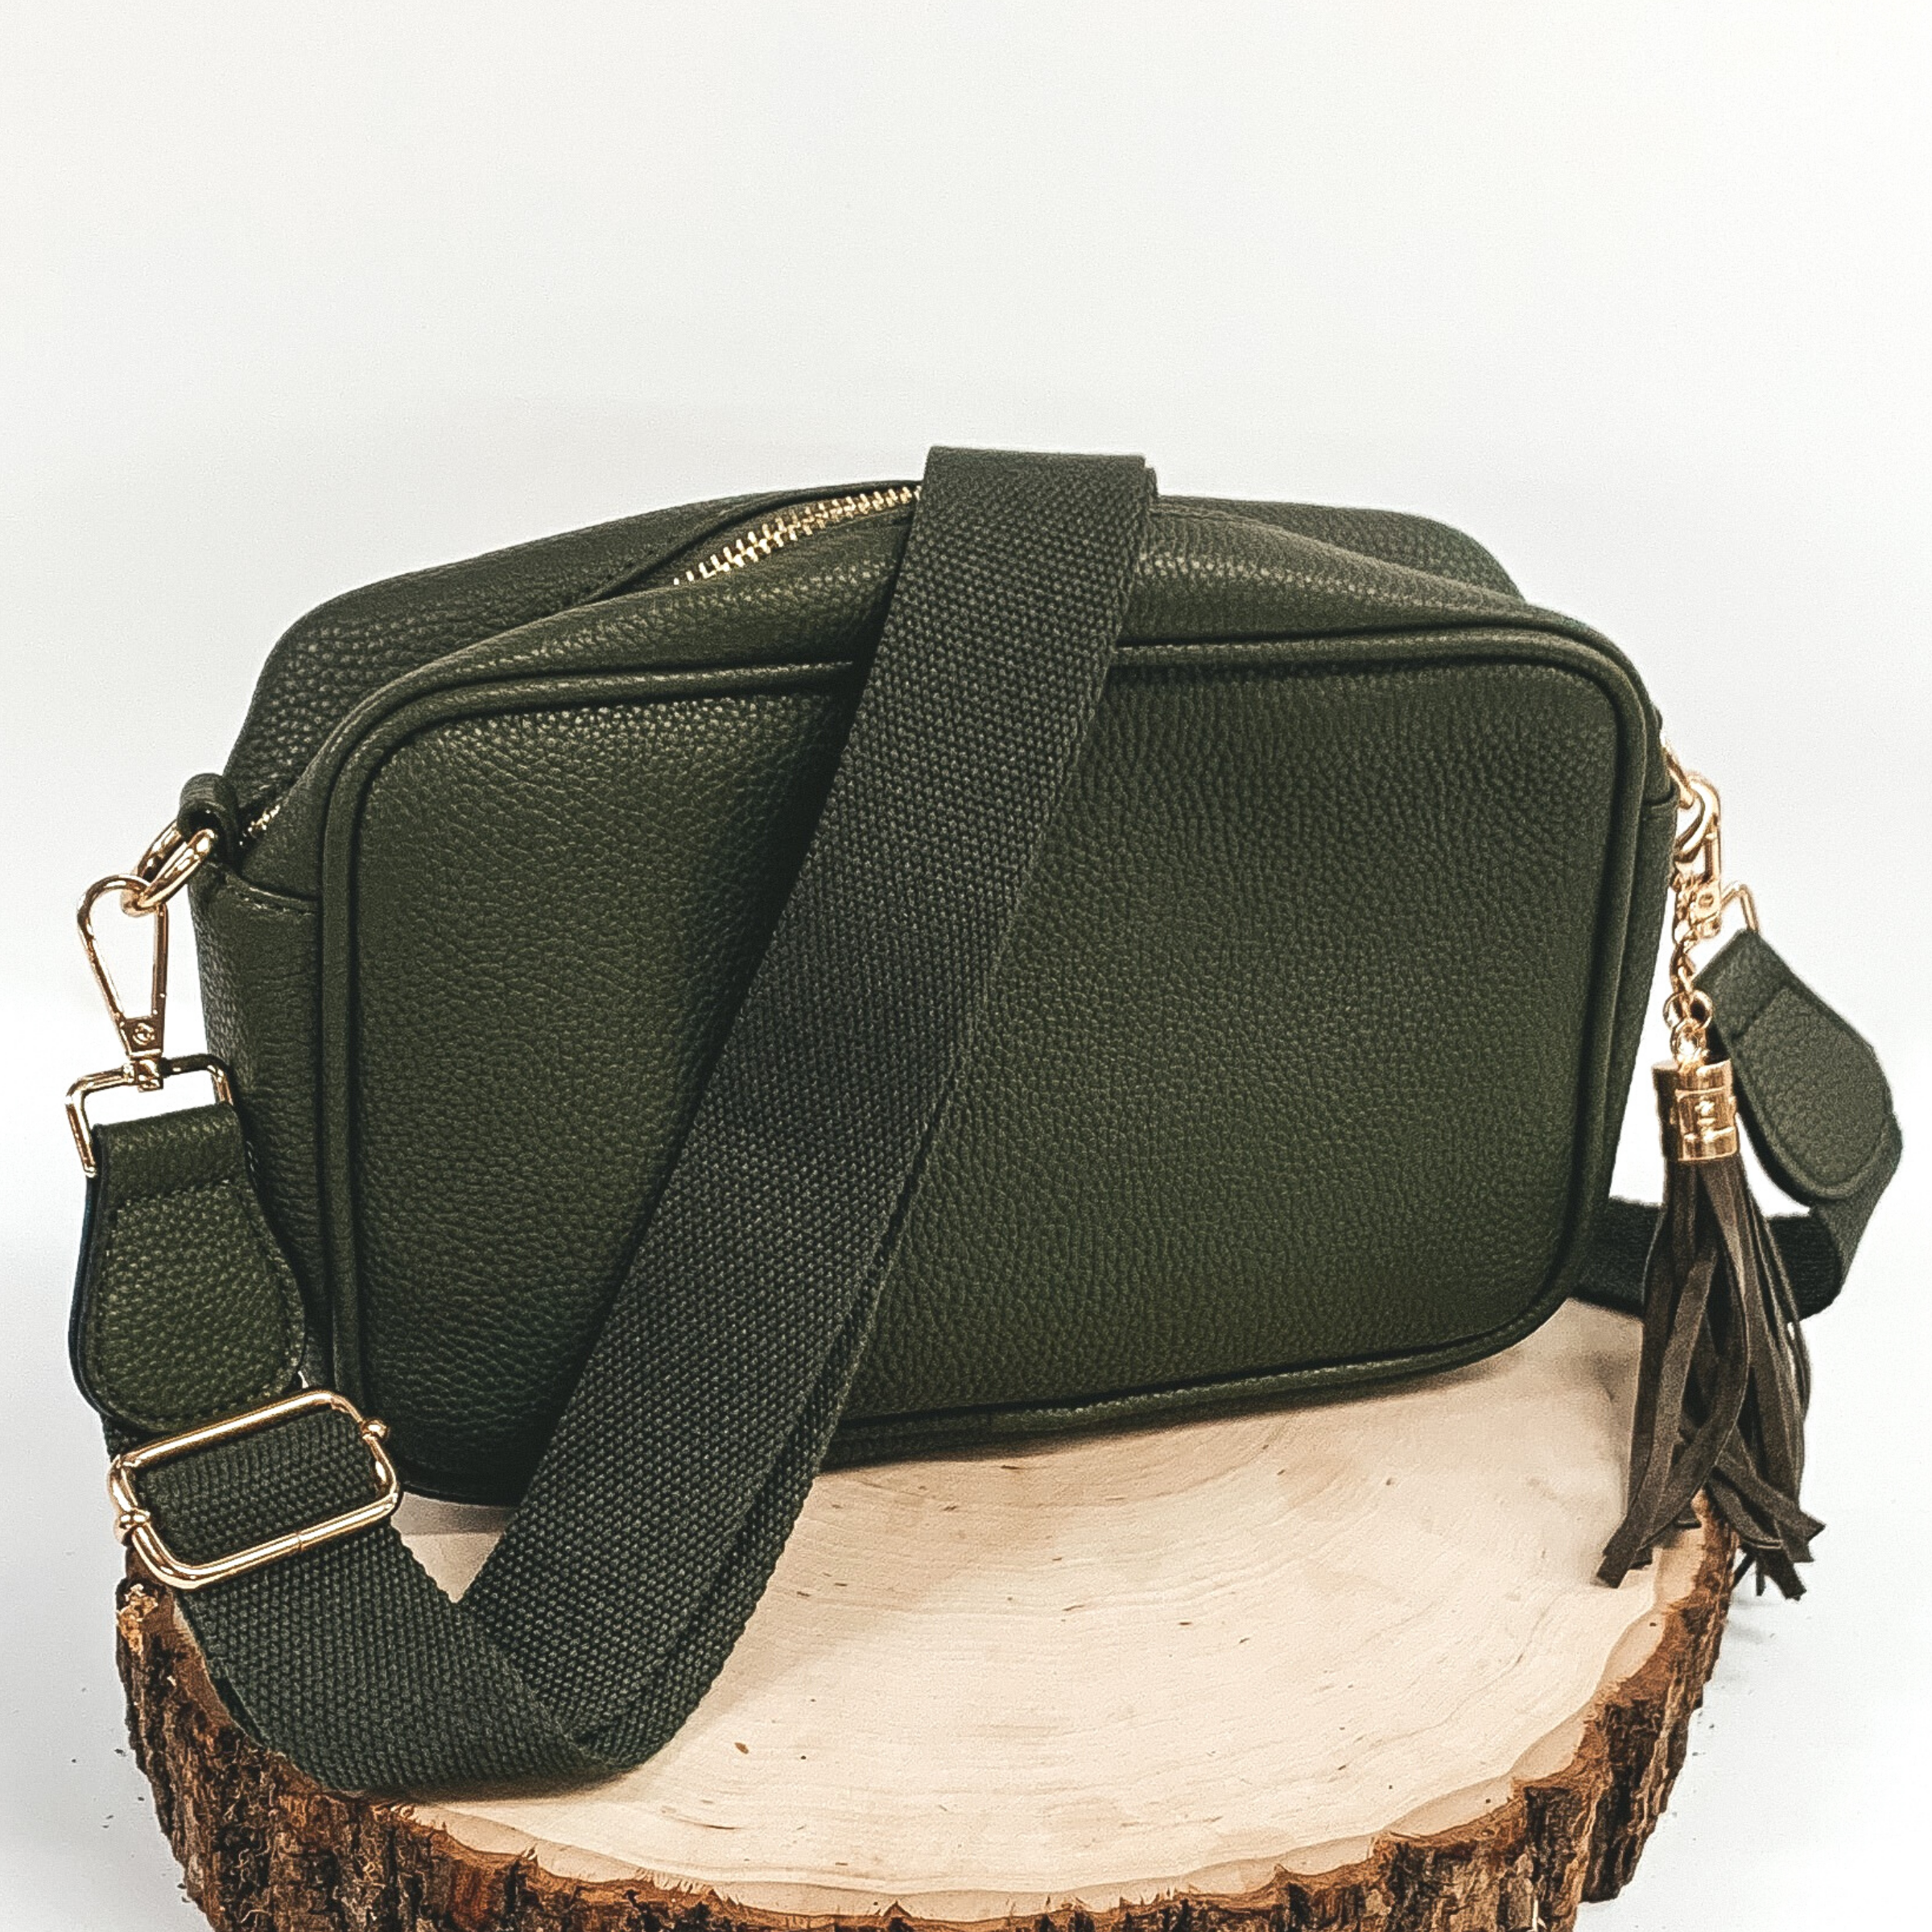 GREEN suede messenger bag: 1 GUITAR strap + 1 suede strap. Soft genuin –  Handmade suede bags by Good Times Barcelona